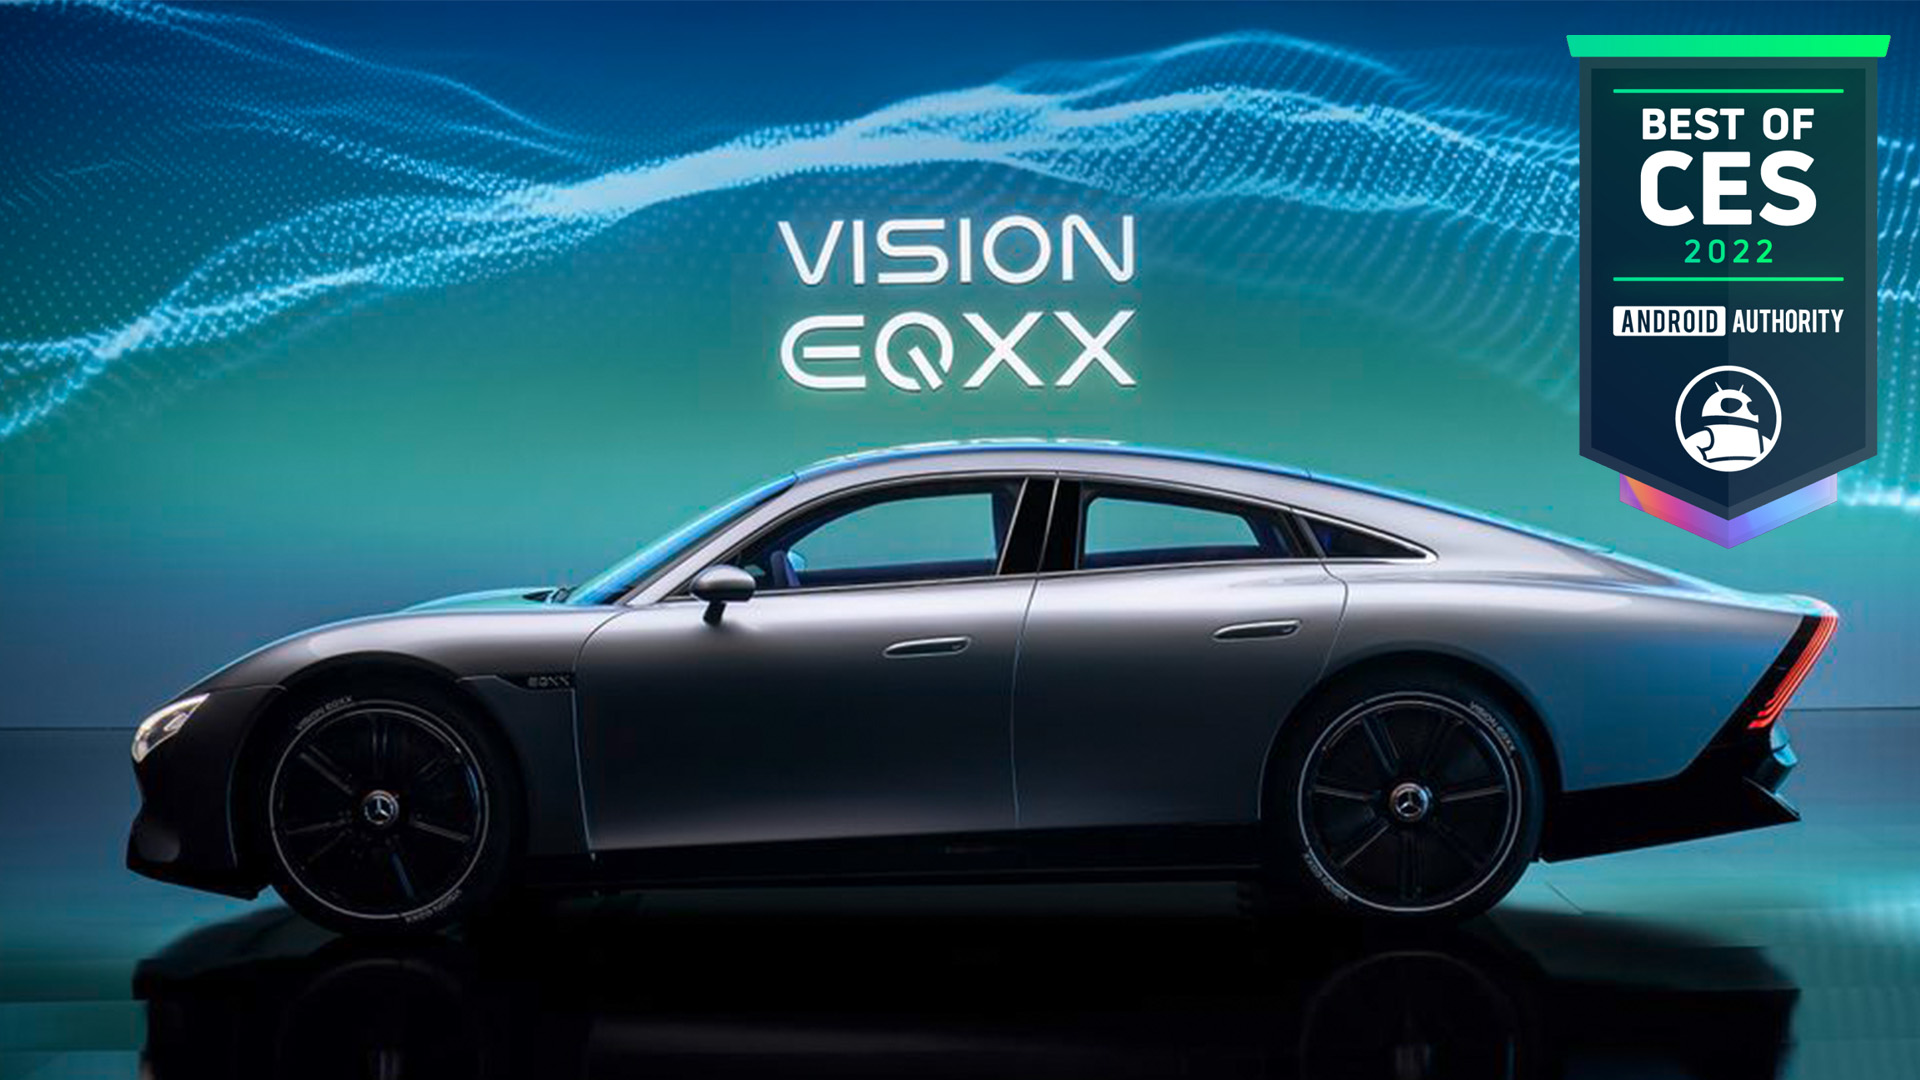 Mercedes Benz EQXX Android Authority Best of CES 2022 Award winner